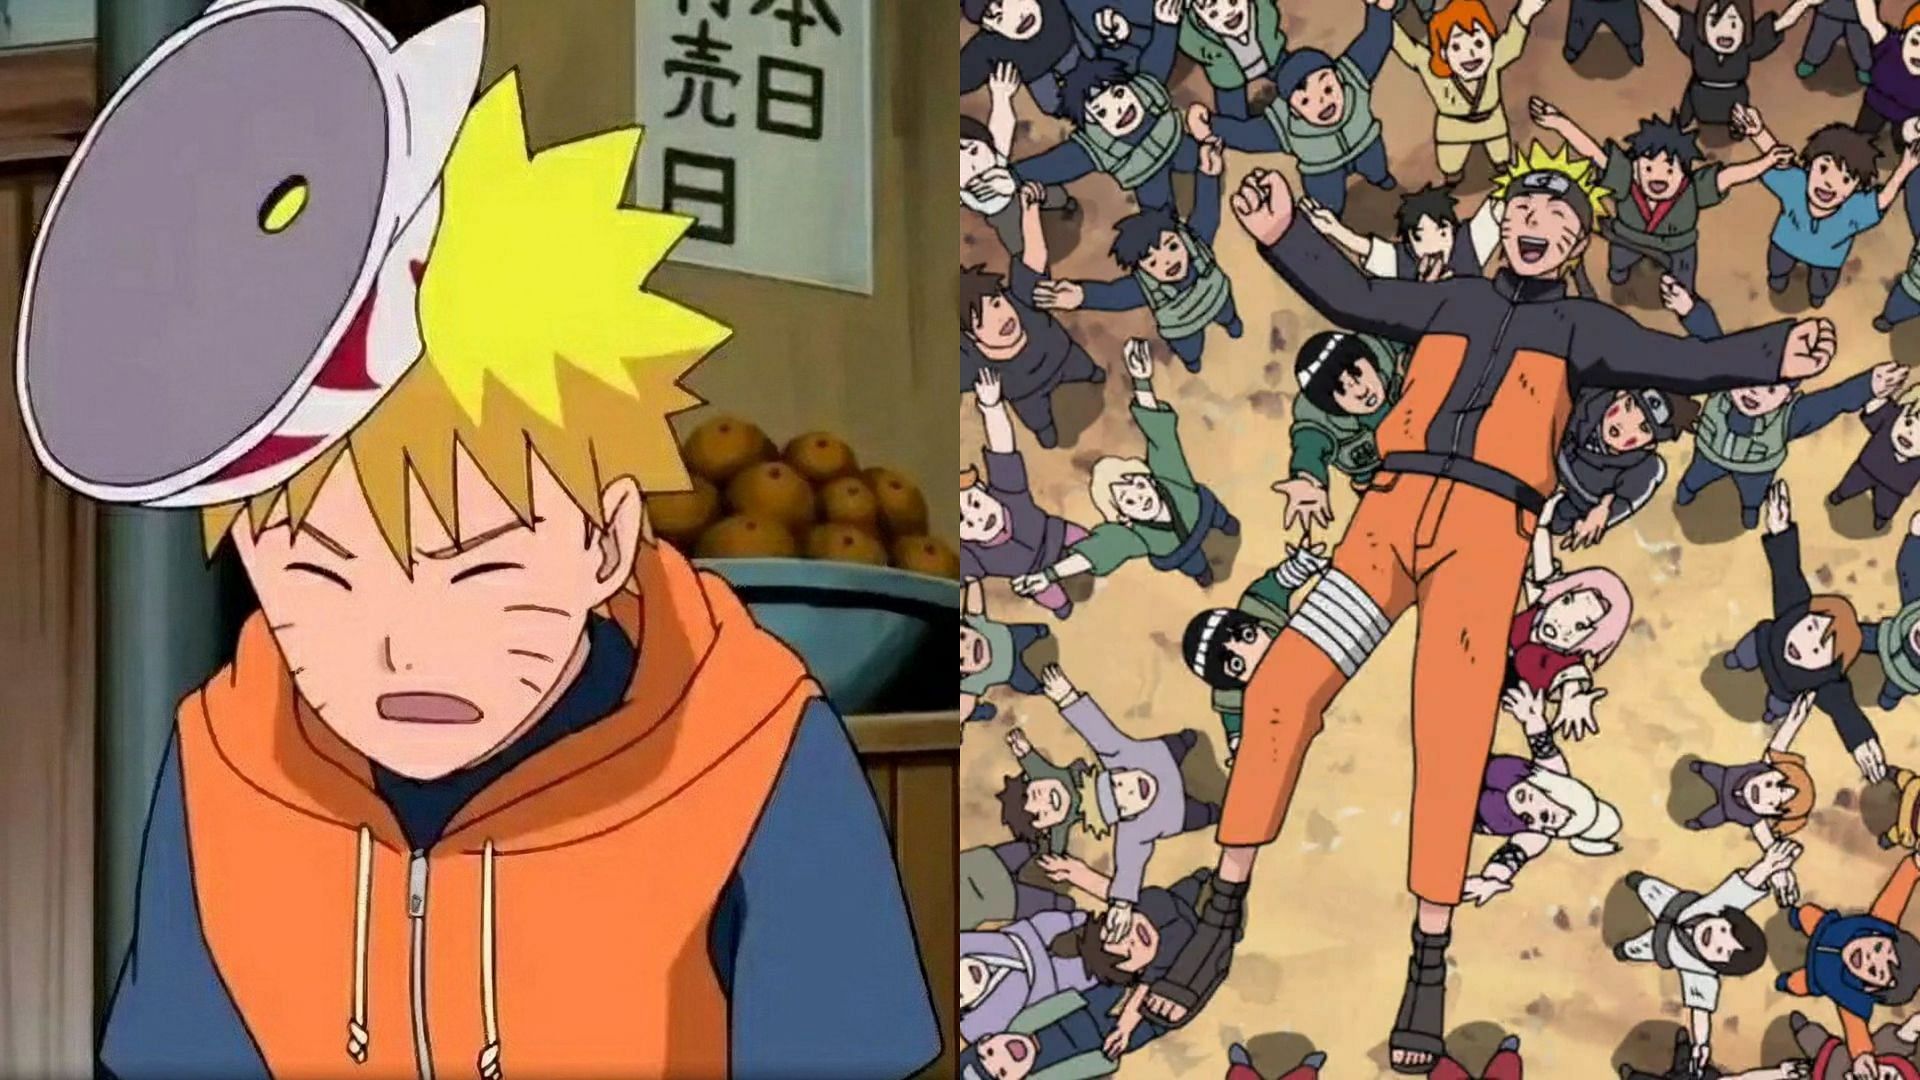 Naruto Online - Naruto has grown from a boy disliked by